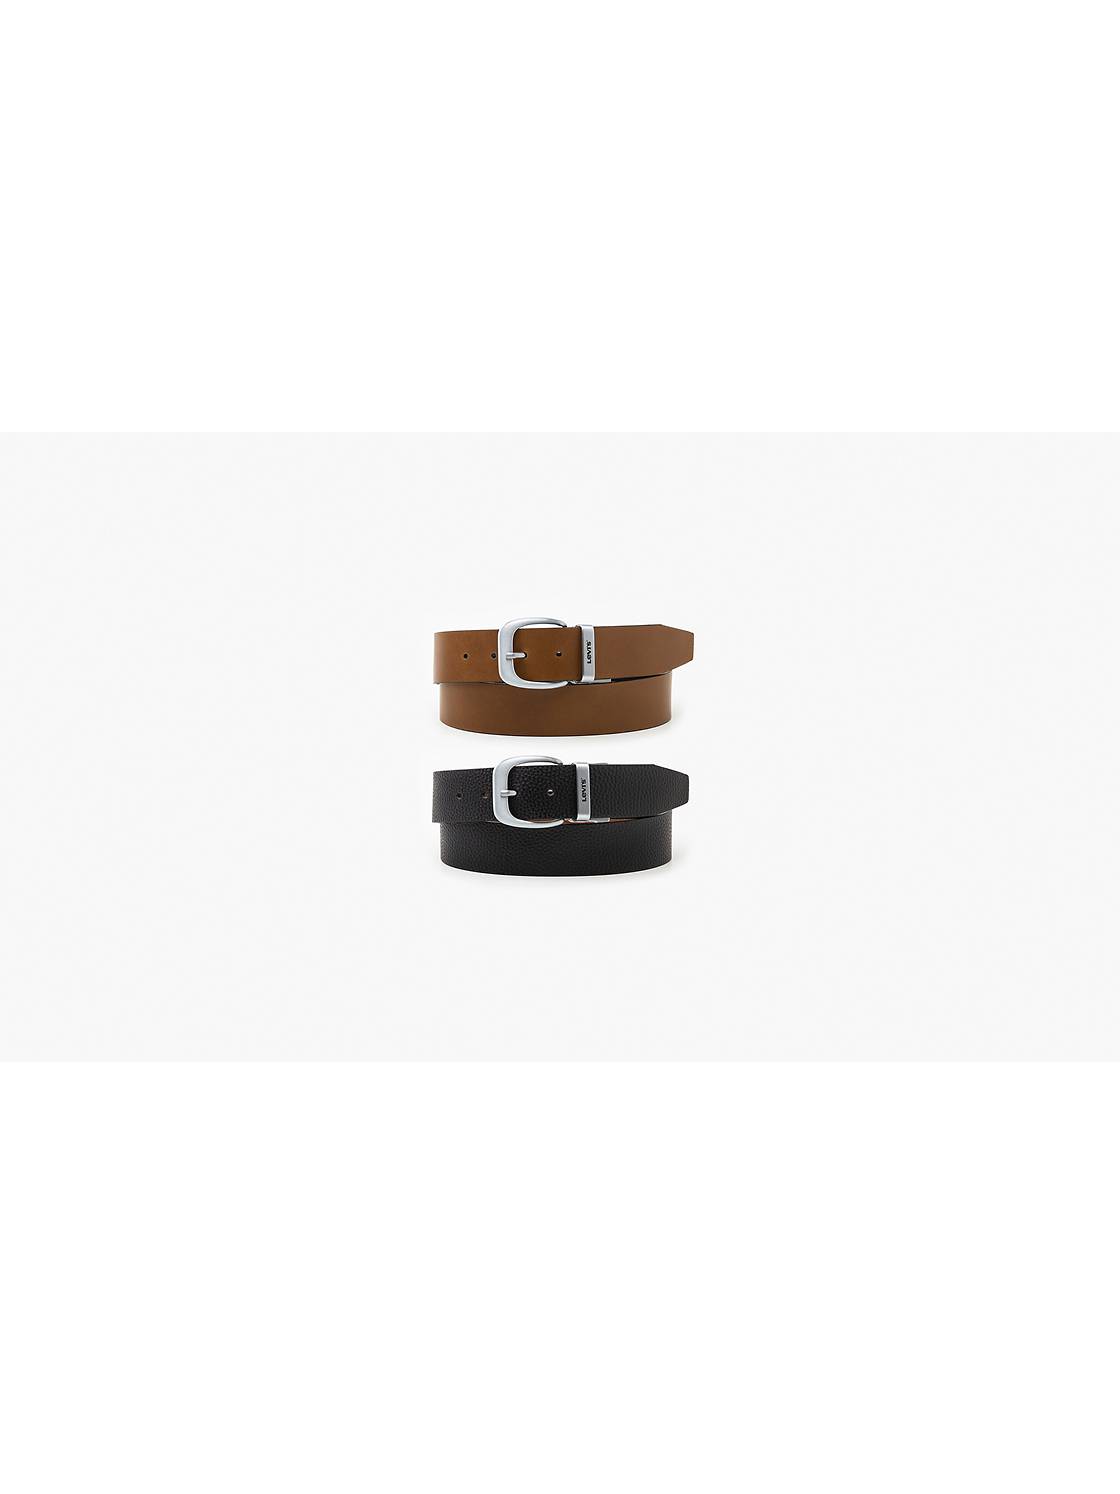 Men's belts with logo and stripes